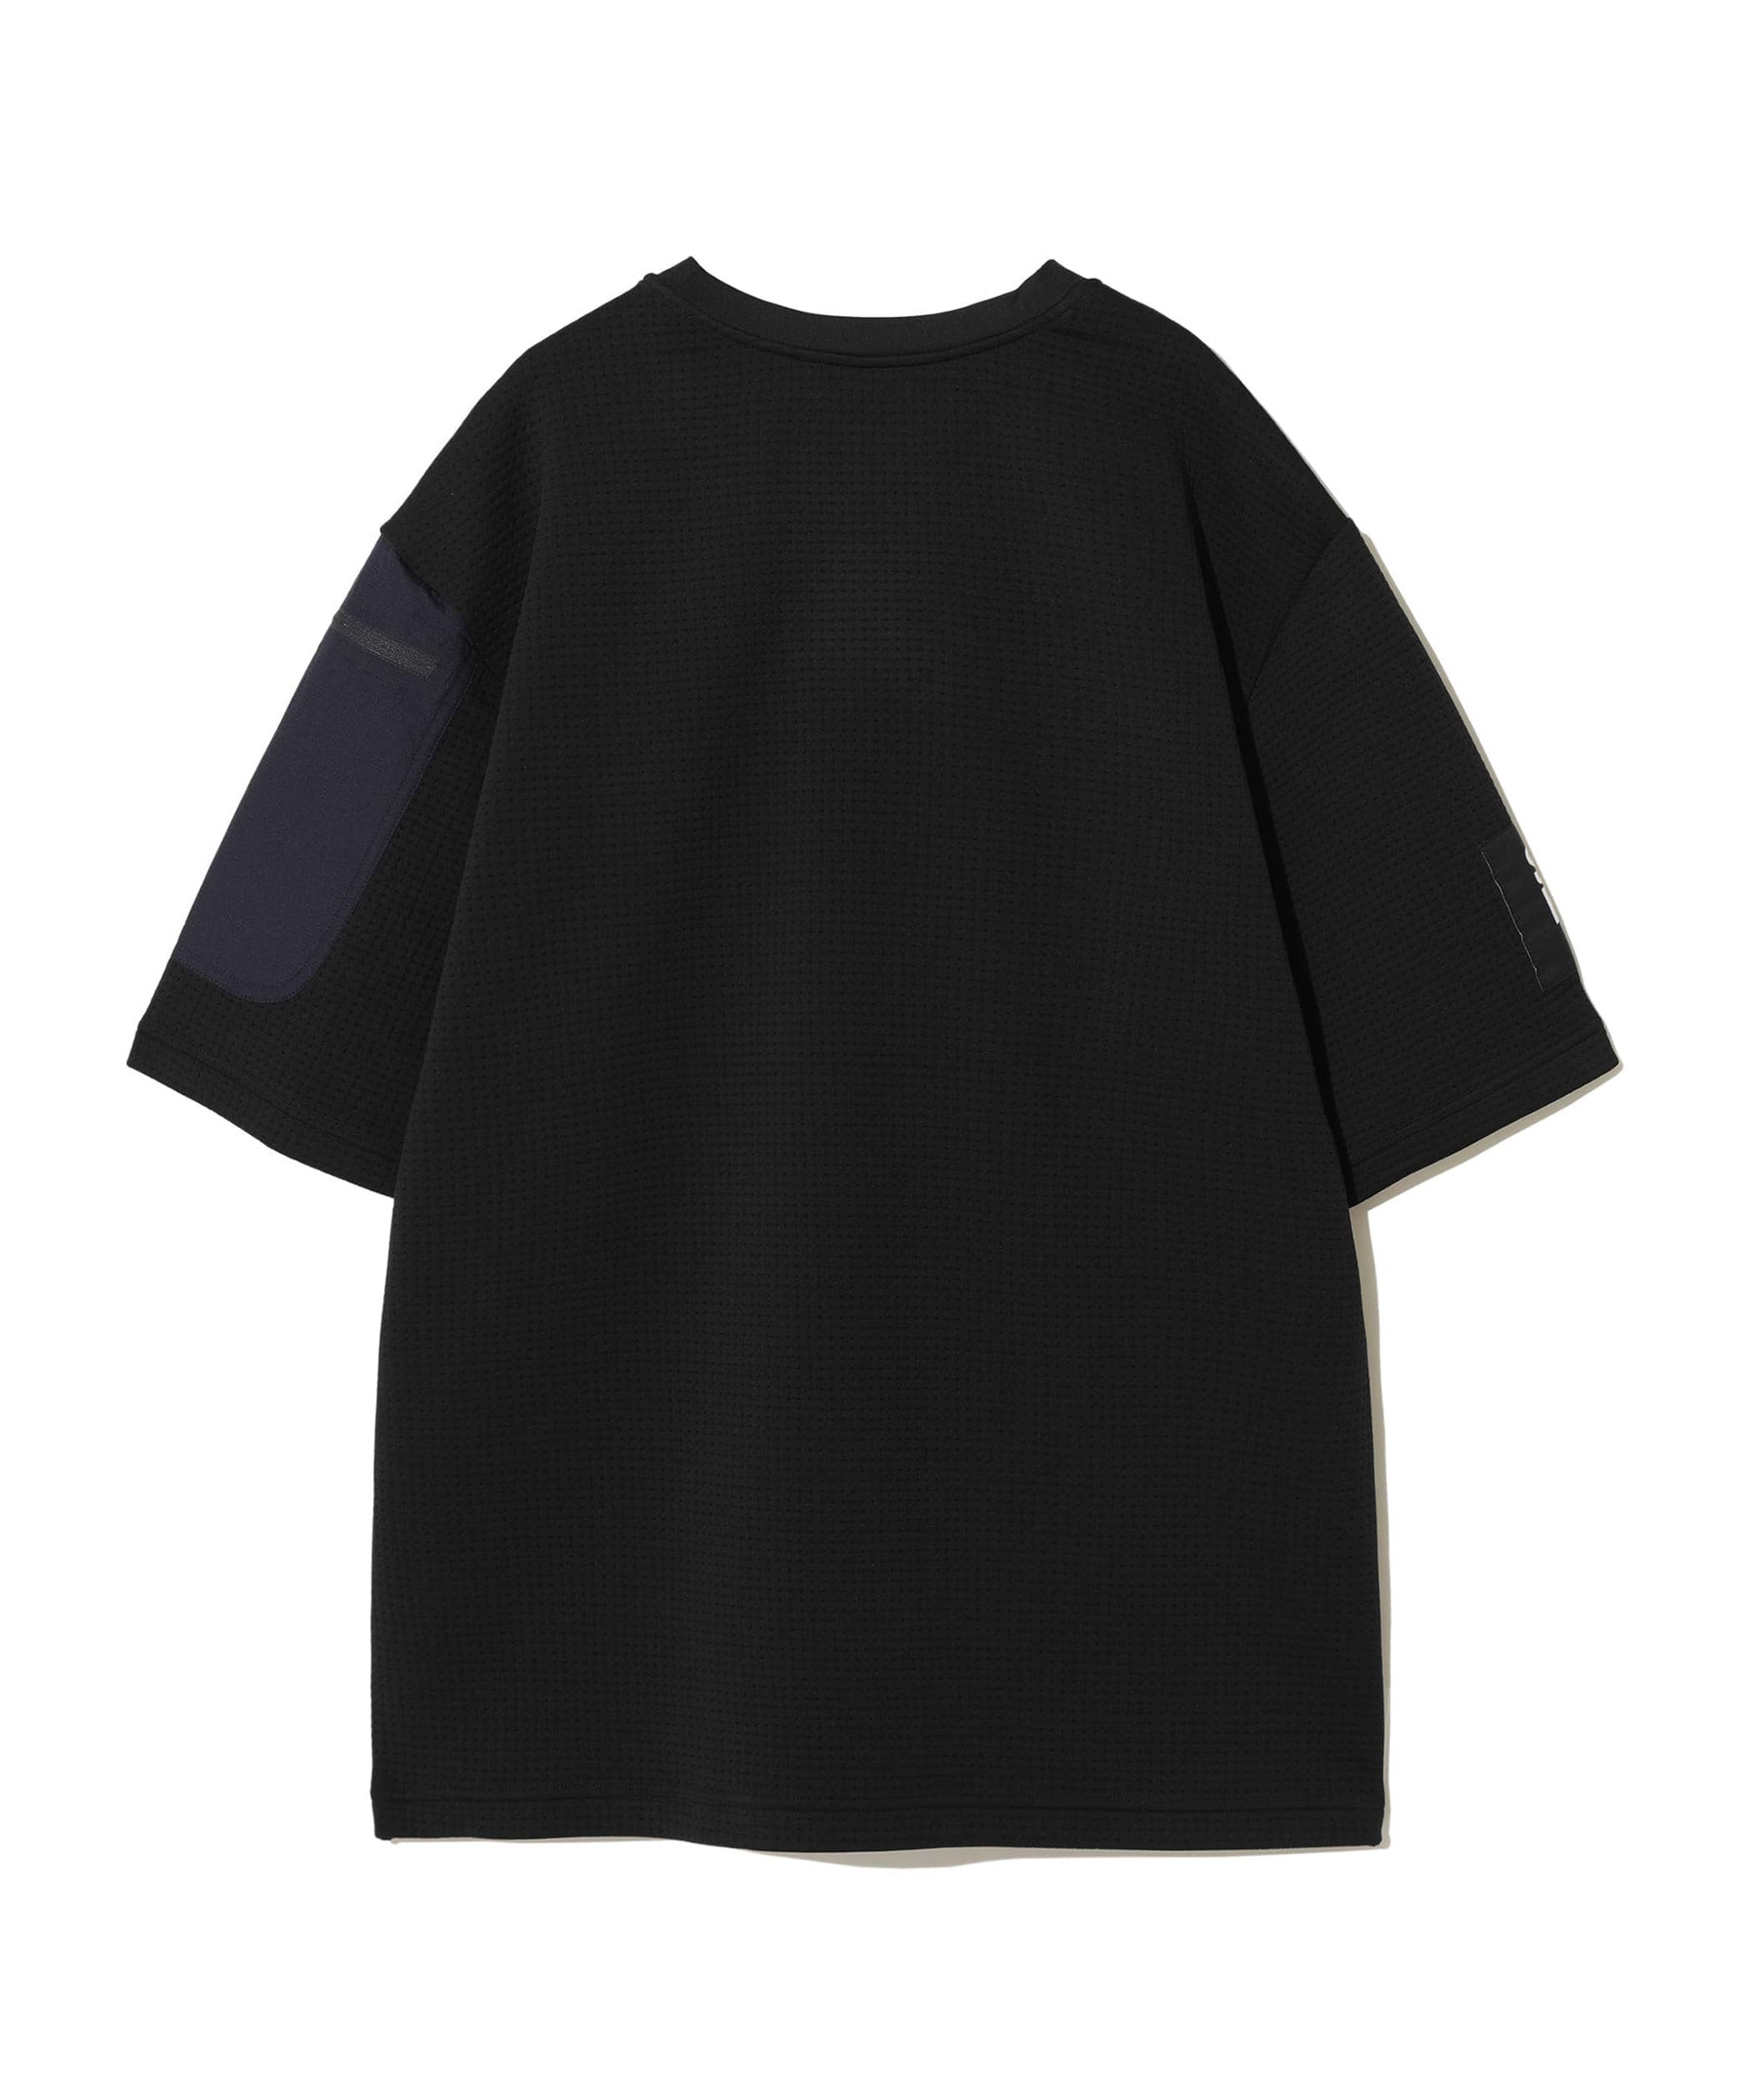 UNDERCOVER Dotknit THE York NORTH New TNF – Atelier X FACE T-Shirt